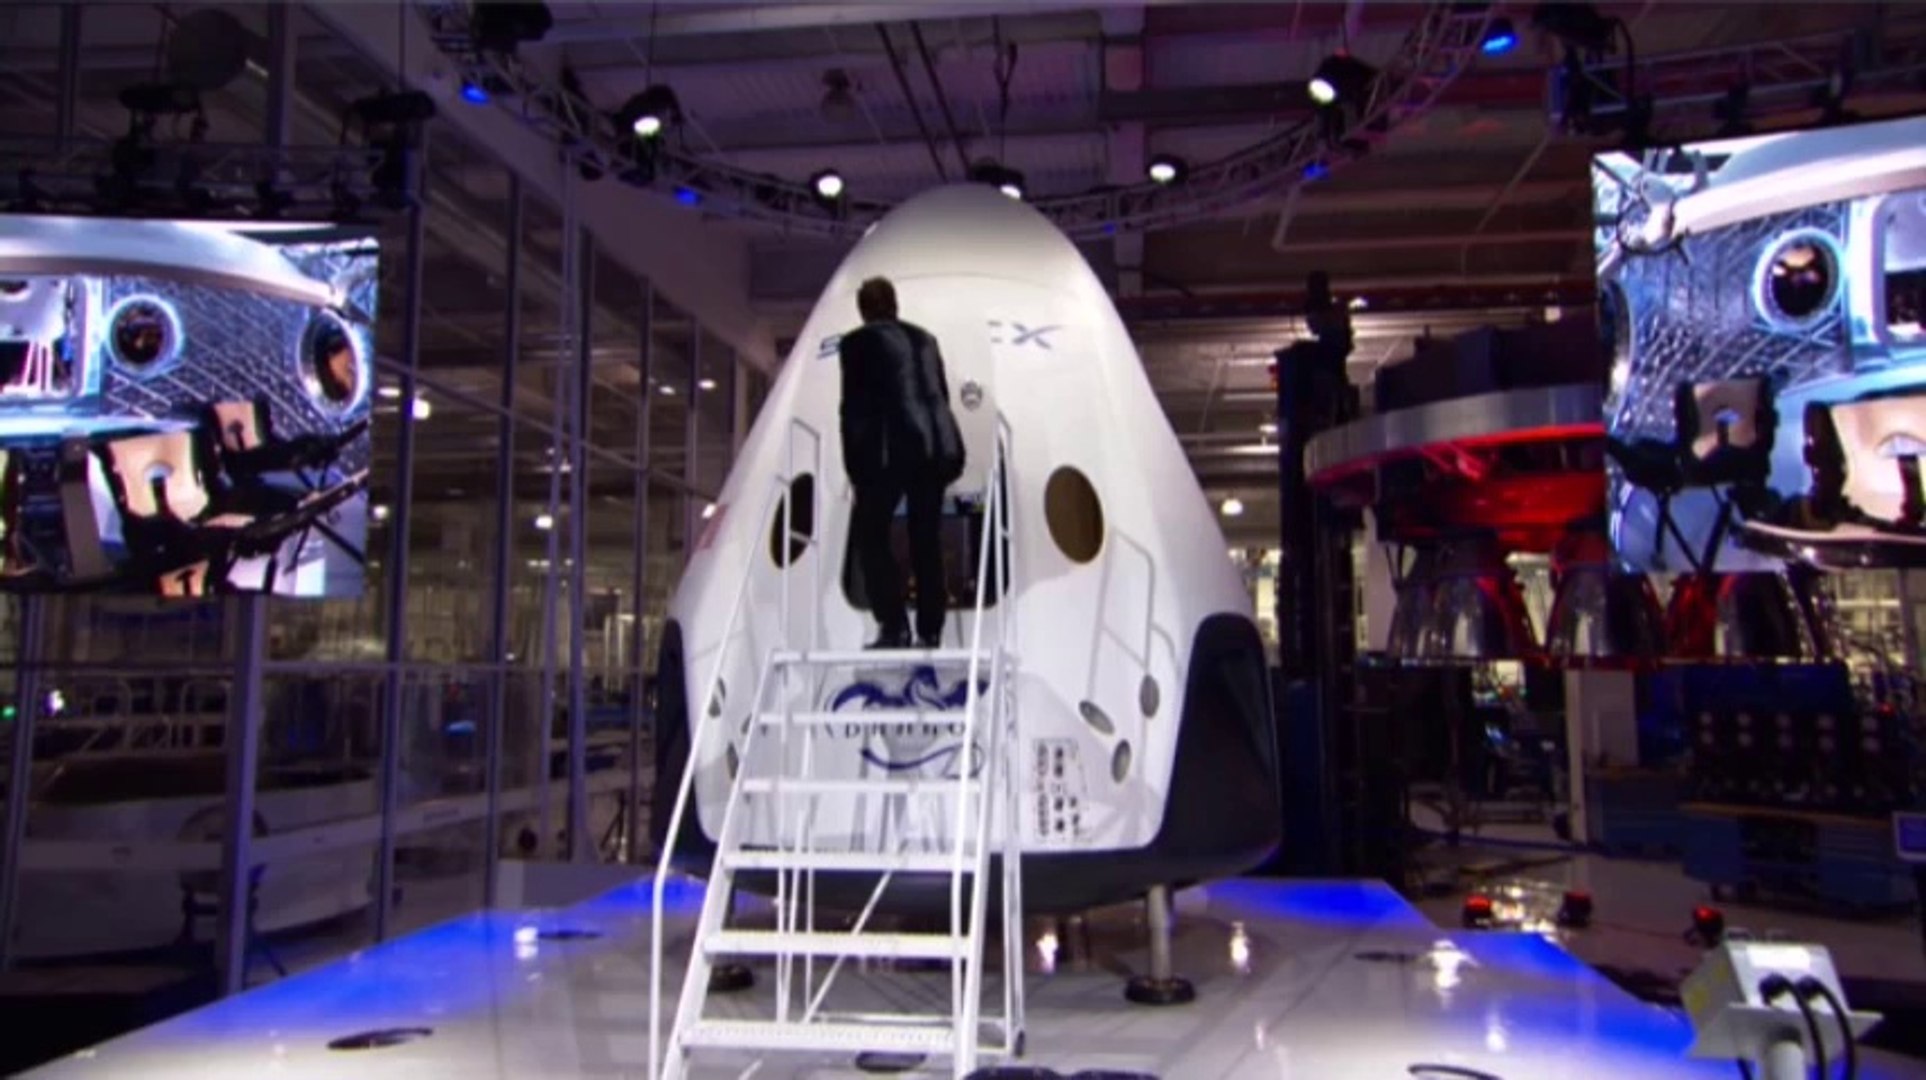 SpaceX has unveiled a new spacecraft, which is said to be much more advanced than the Falcon 9. The 